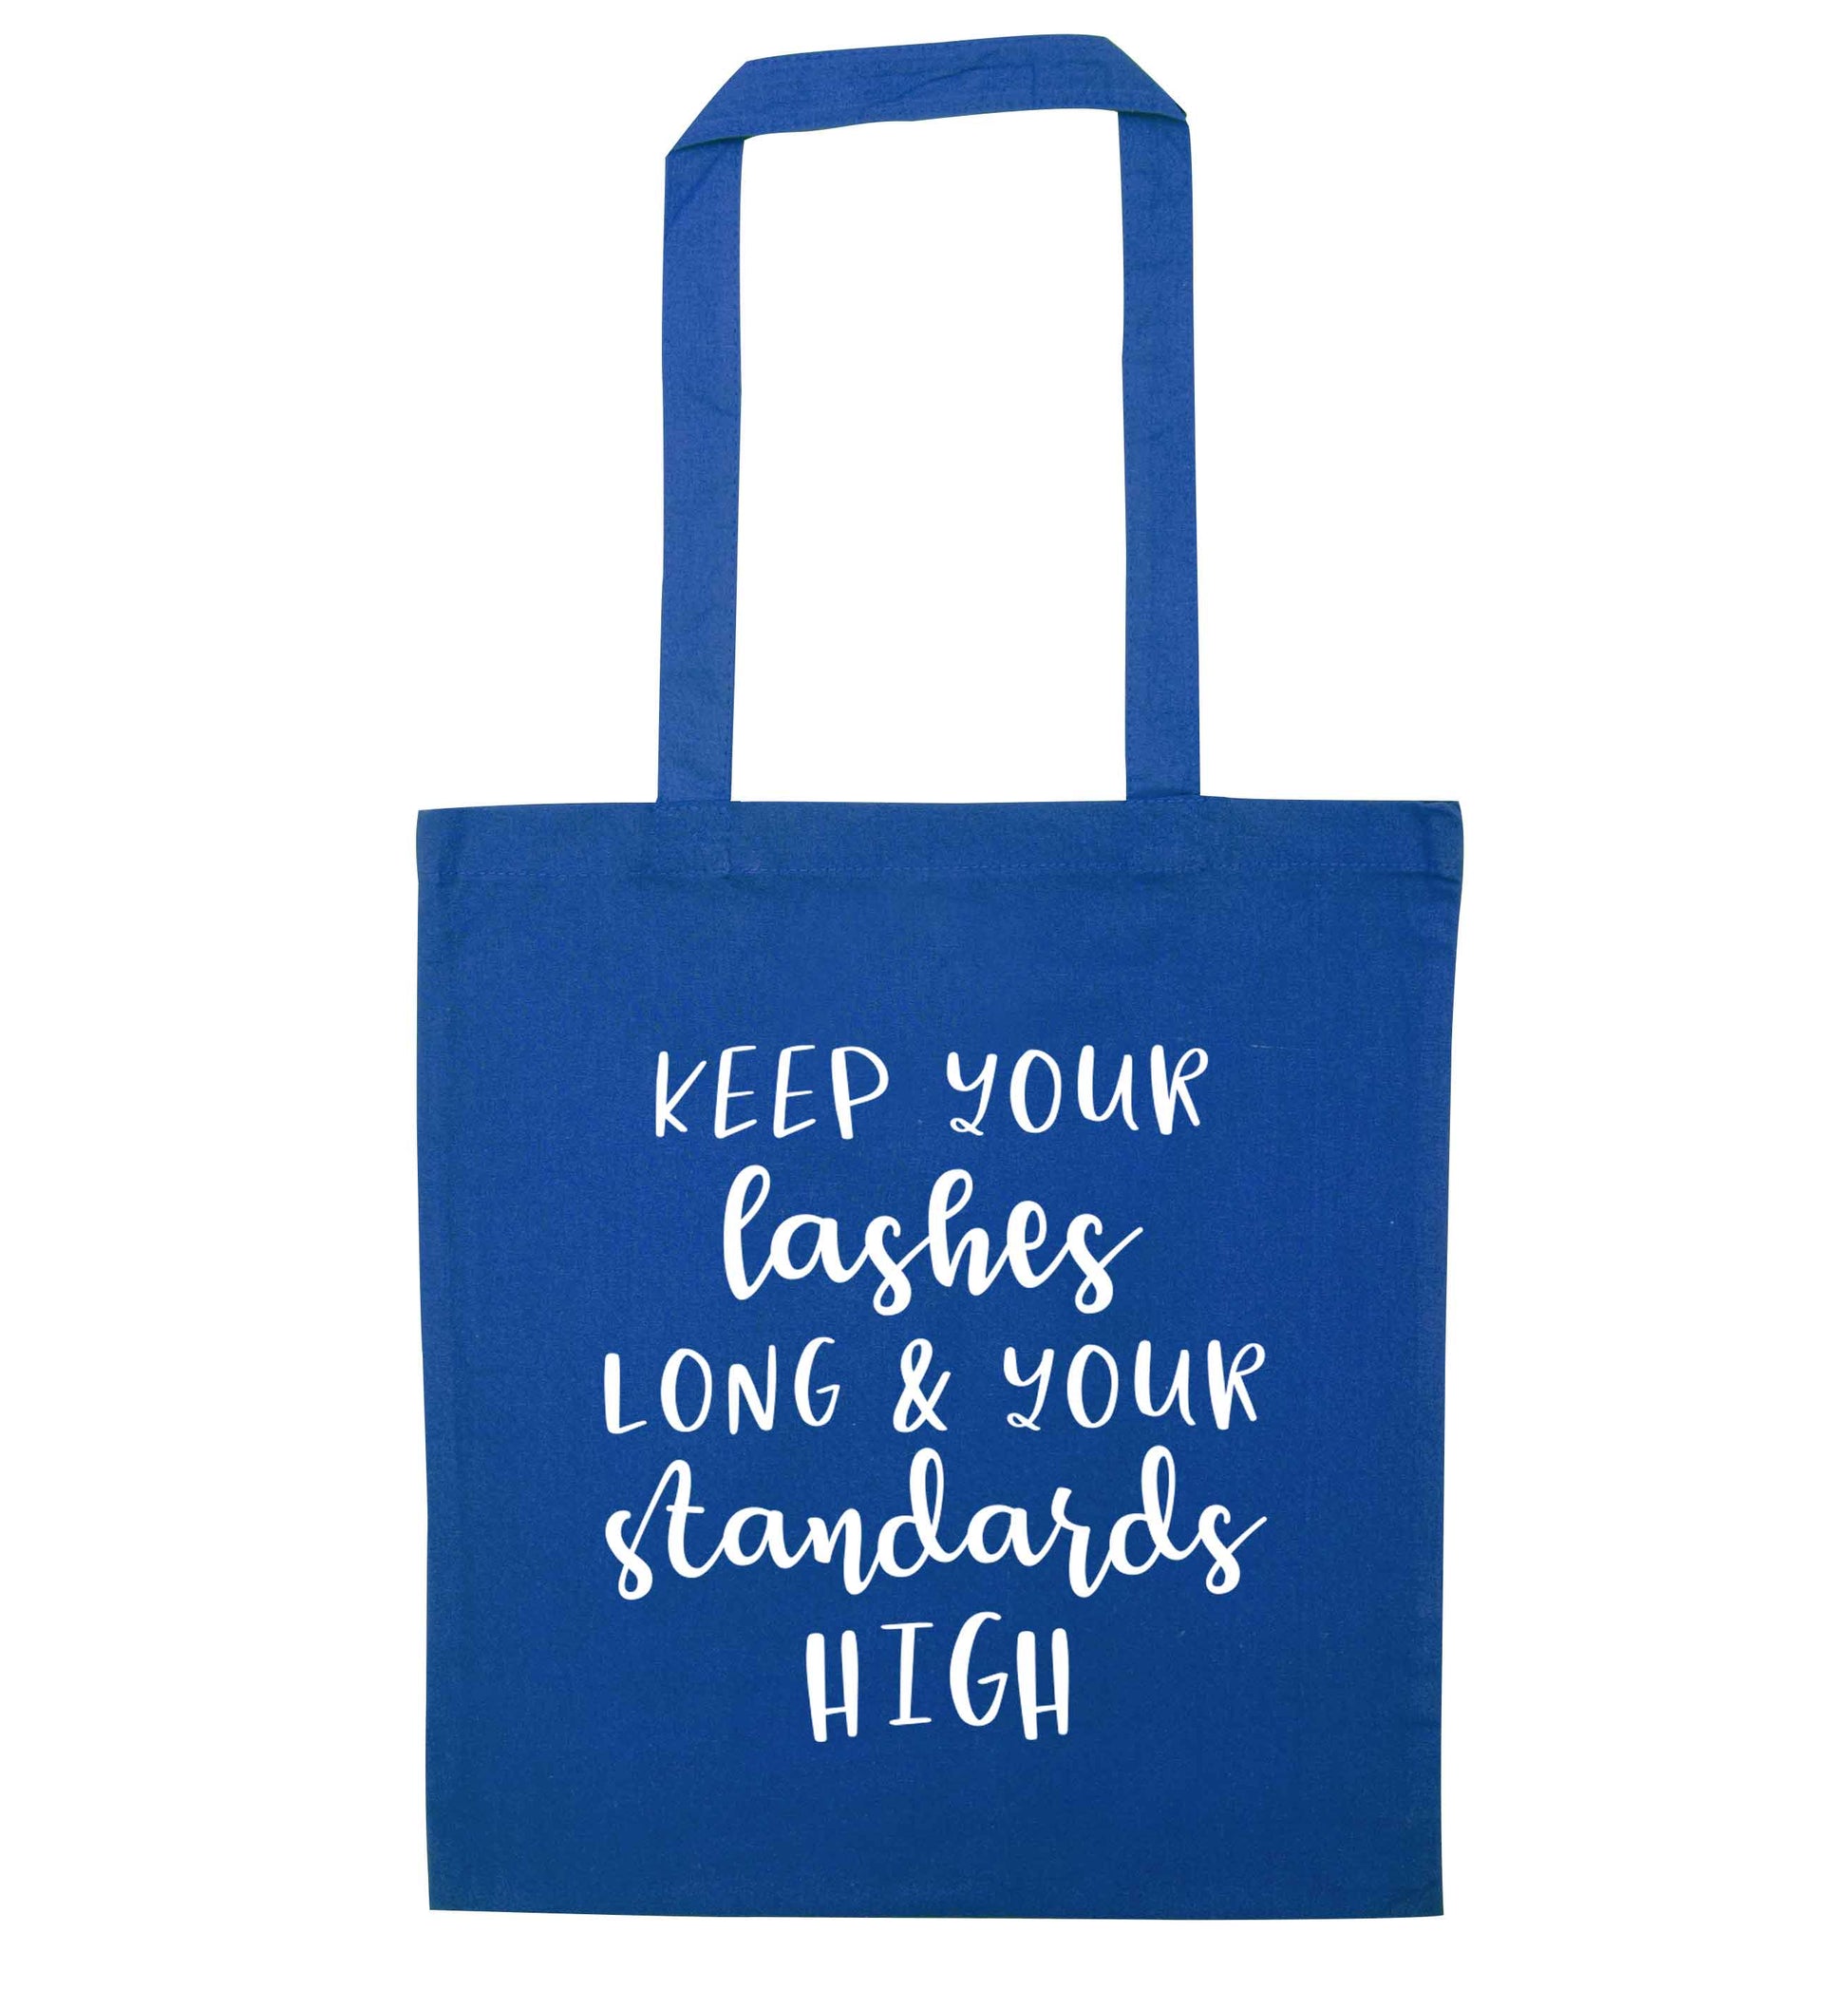 Keep your lashes long and your standards high blue tote bag